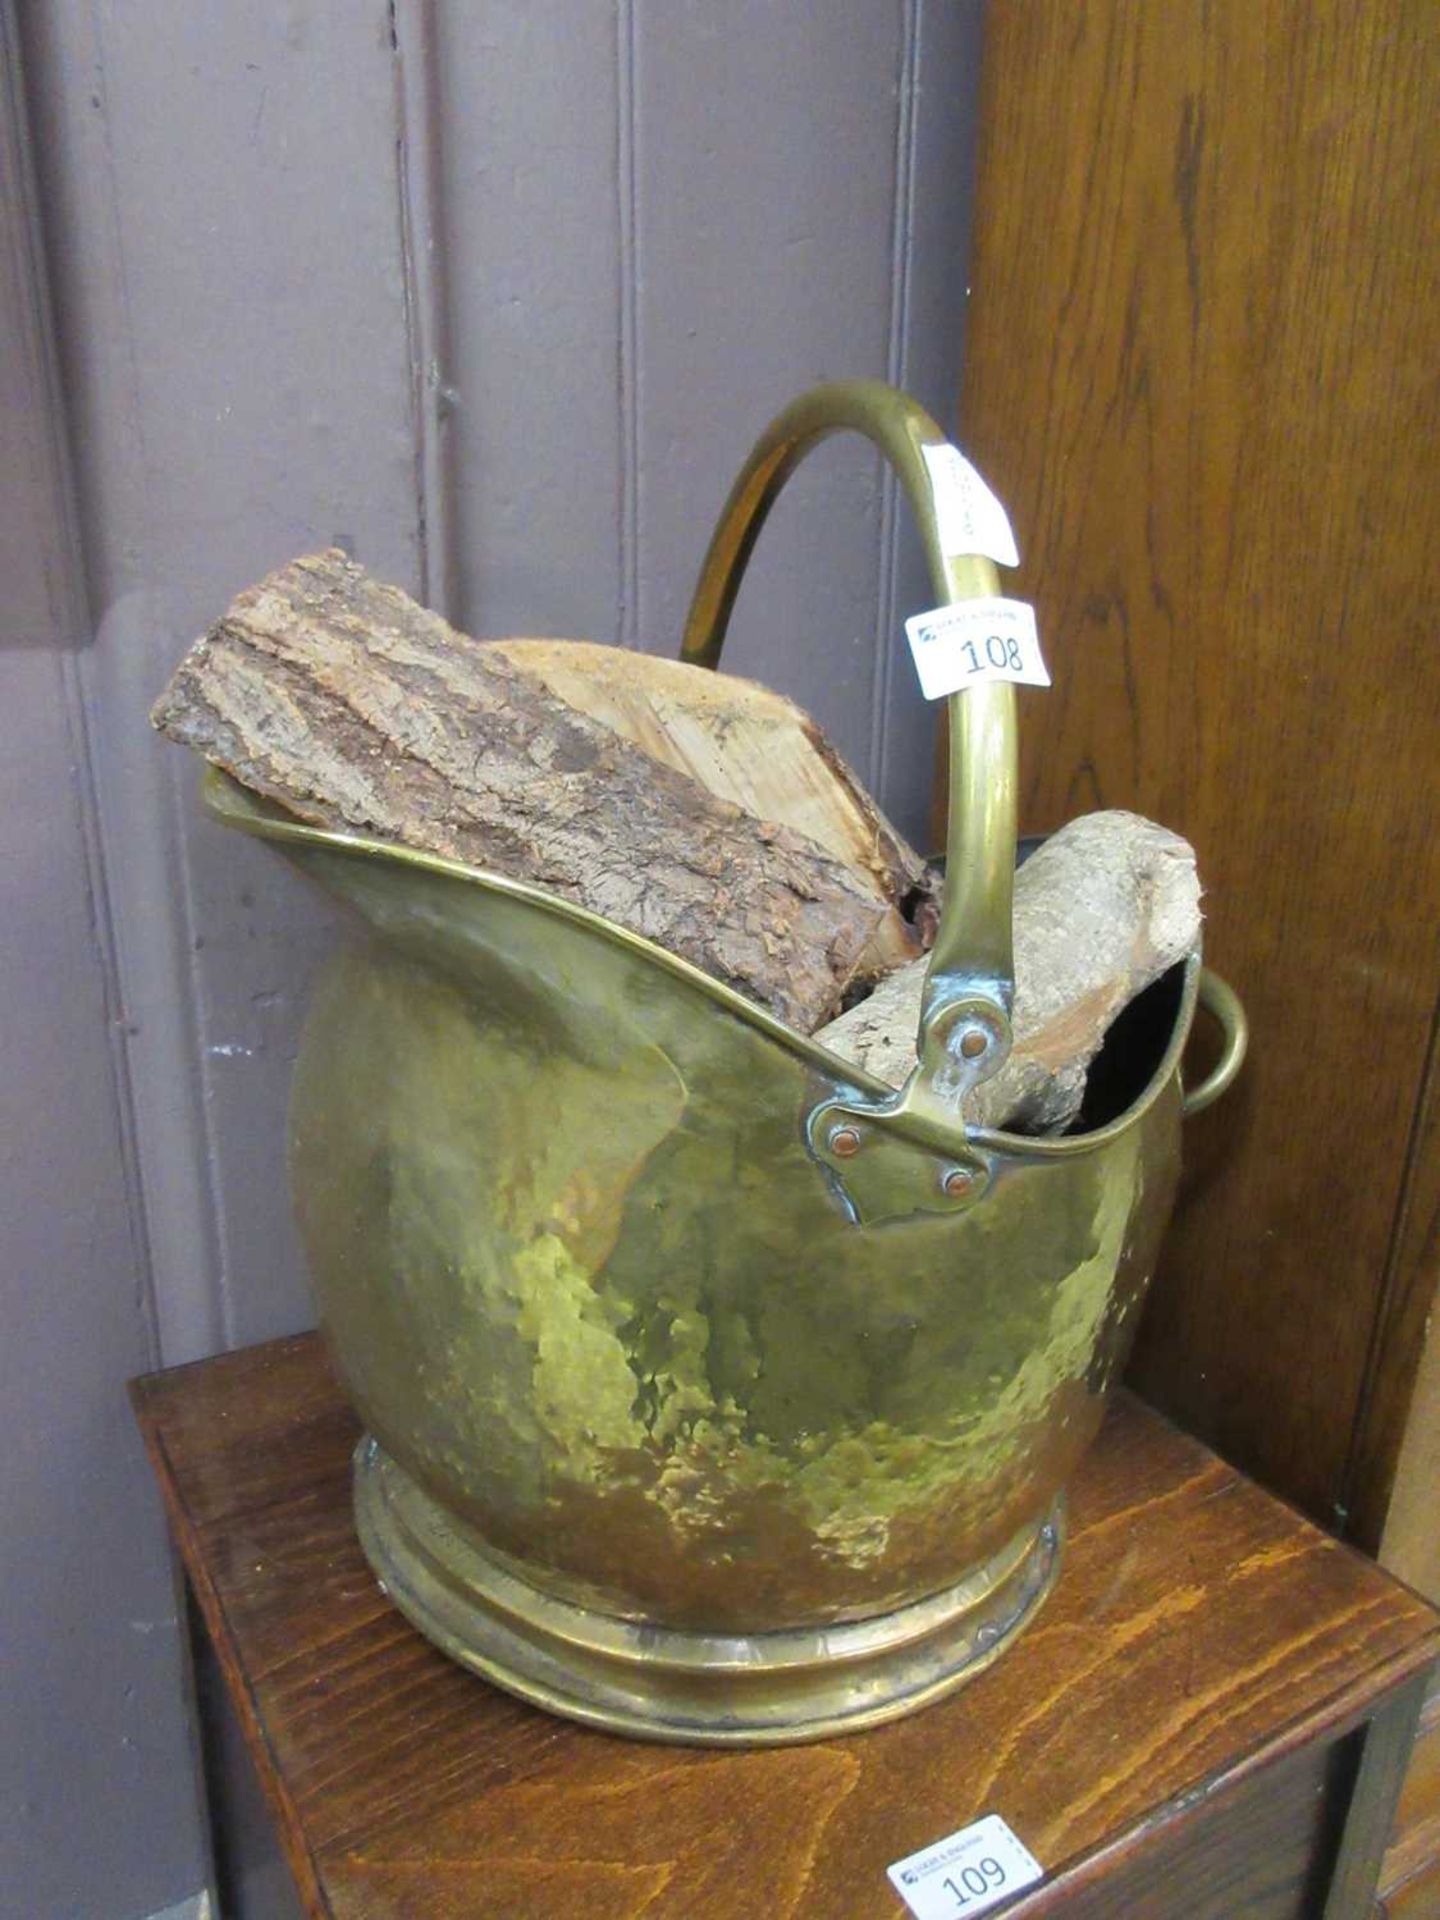 A hammered brass coal scuttle containing wood